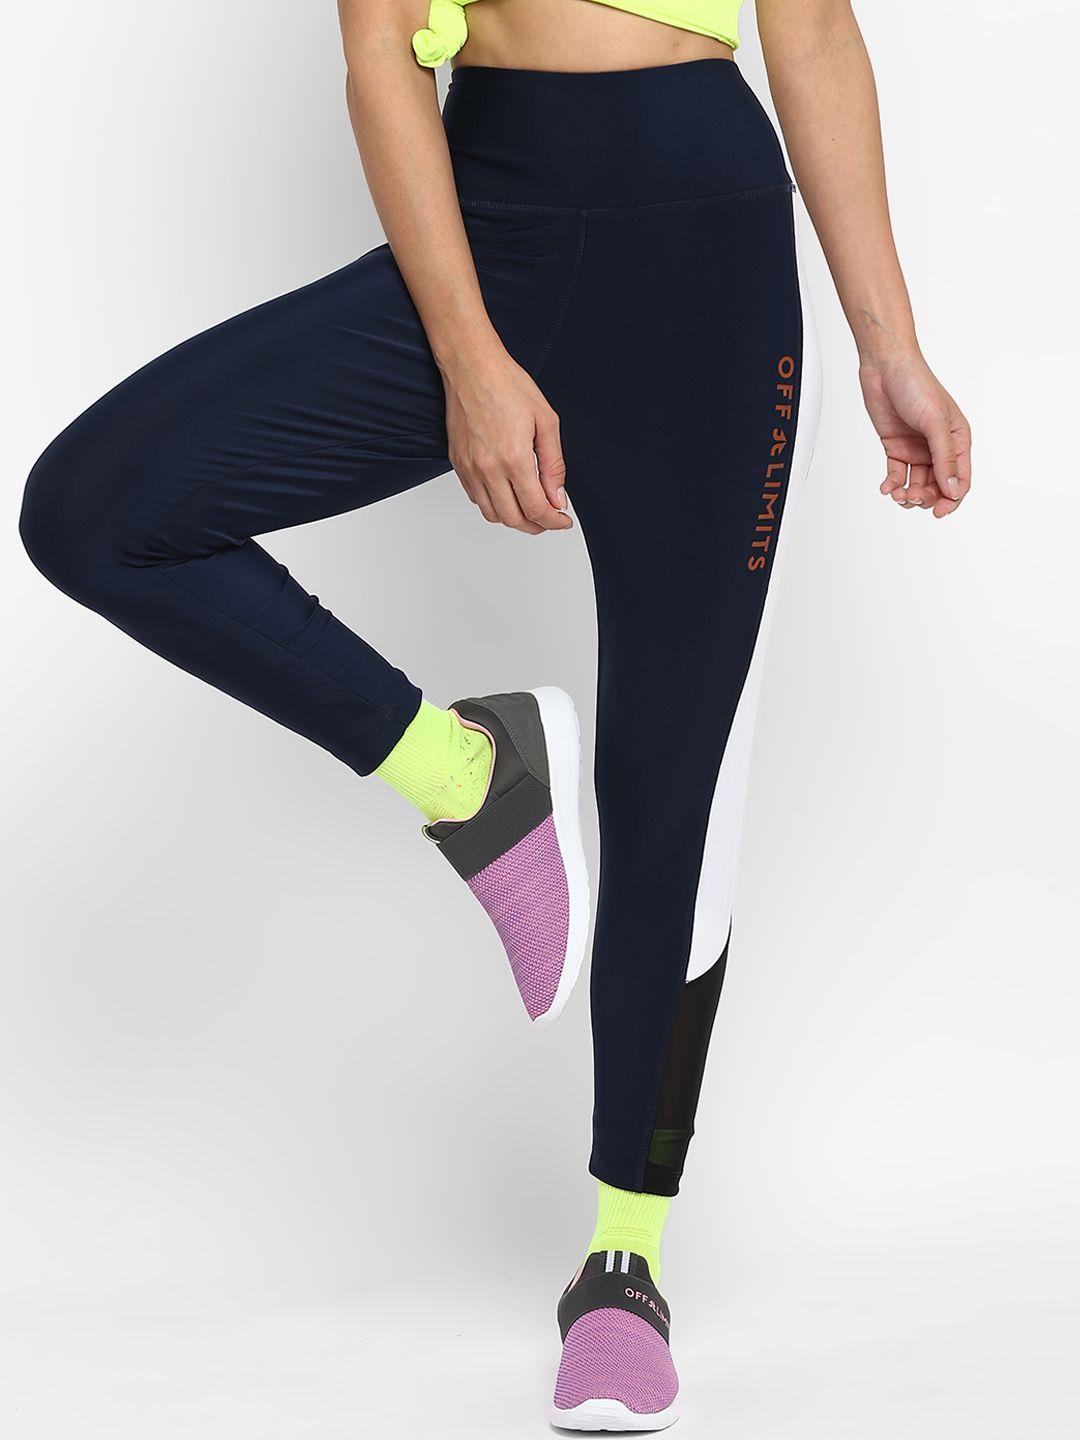 off-limits-women-navy-blue-solid-tights